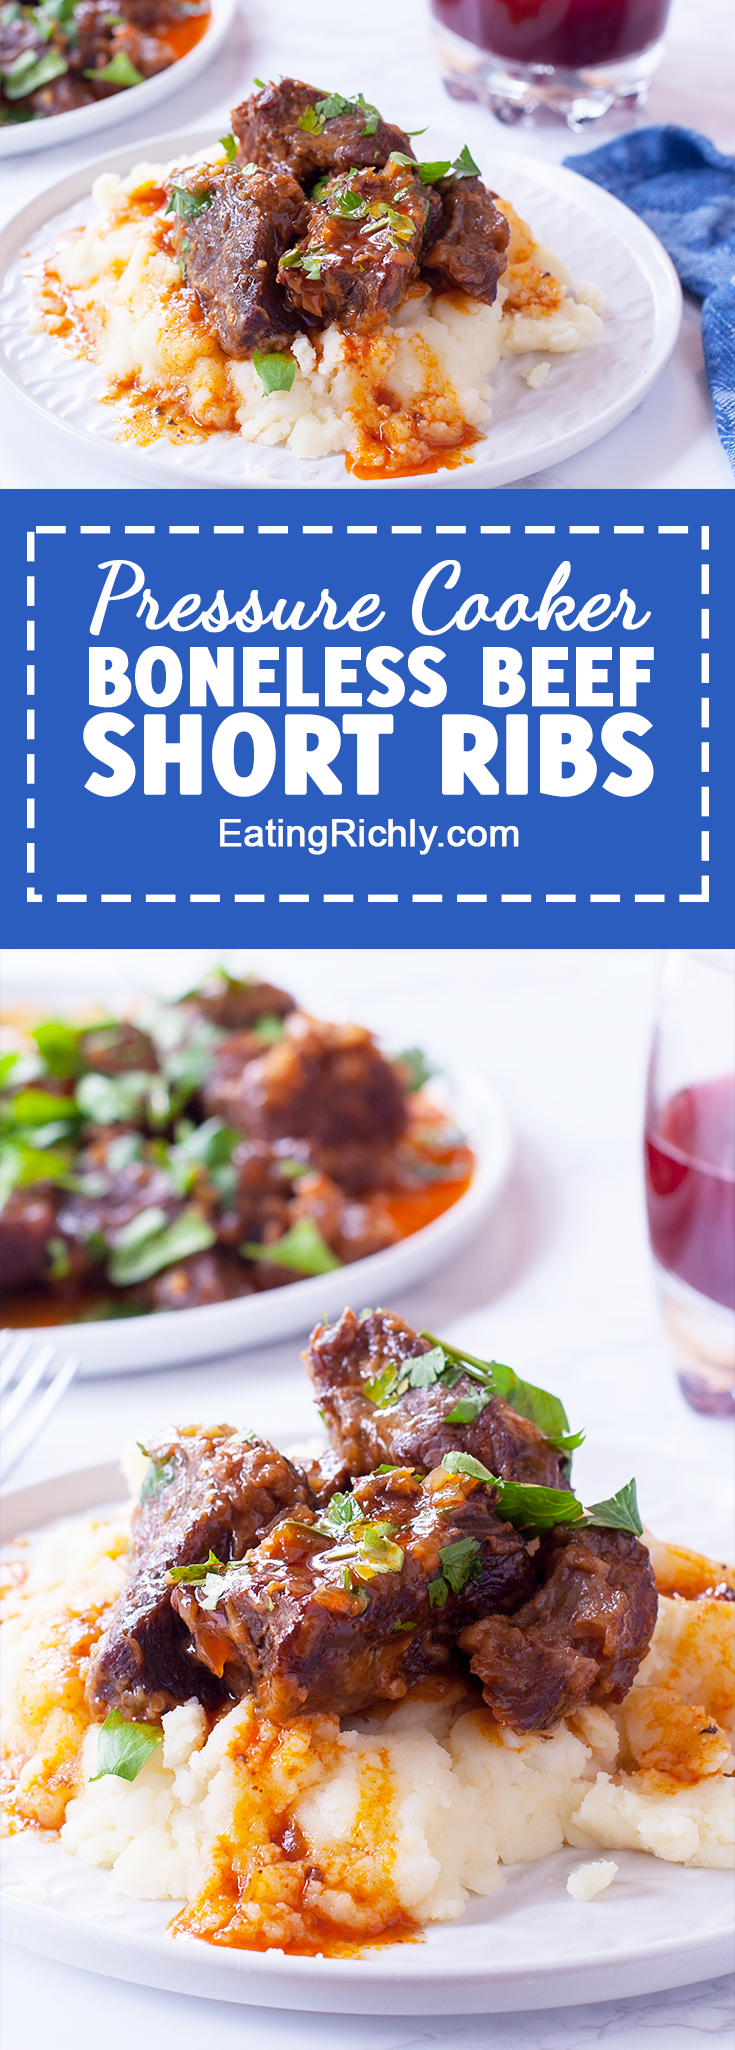 This pressure cooker short ribs recipe makes fall apart tender boneless beef short ribs in under an hour using the Instant Pot or your favorite pressure cooker. You won't believe it until you try it! From EatingRichly.com